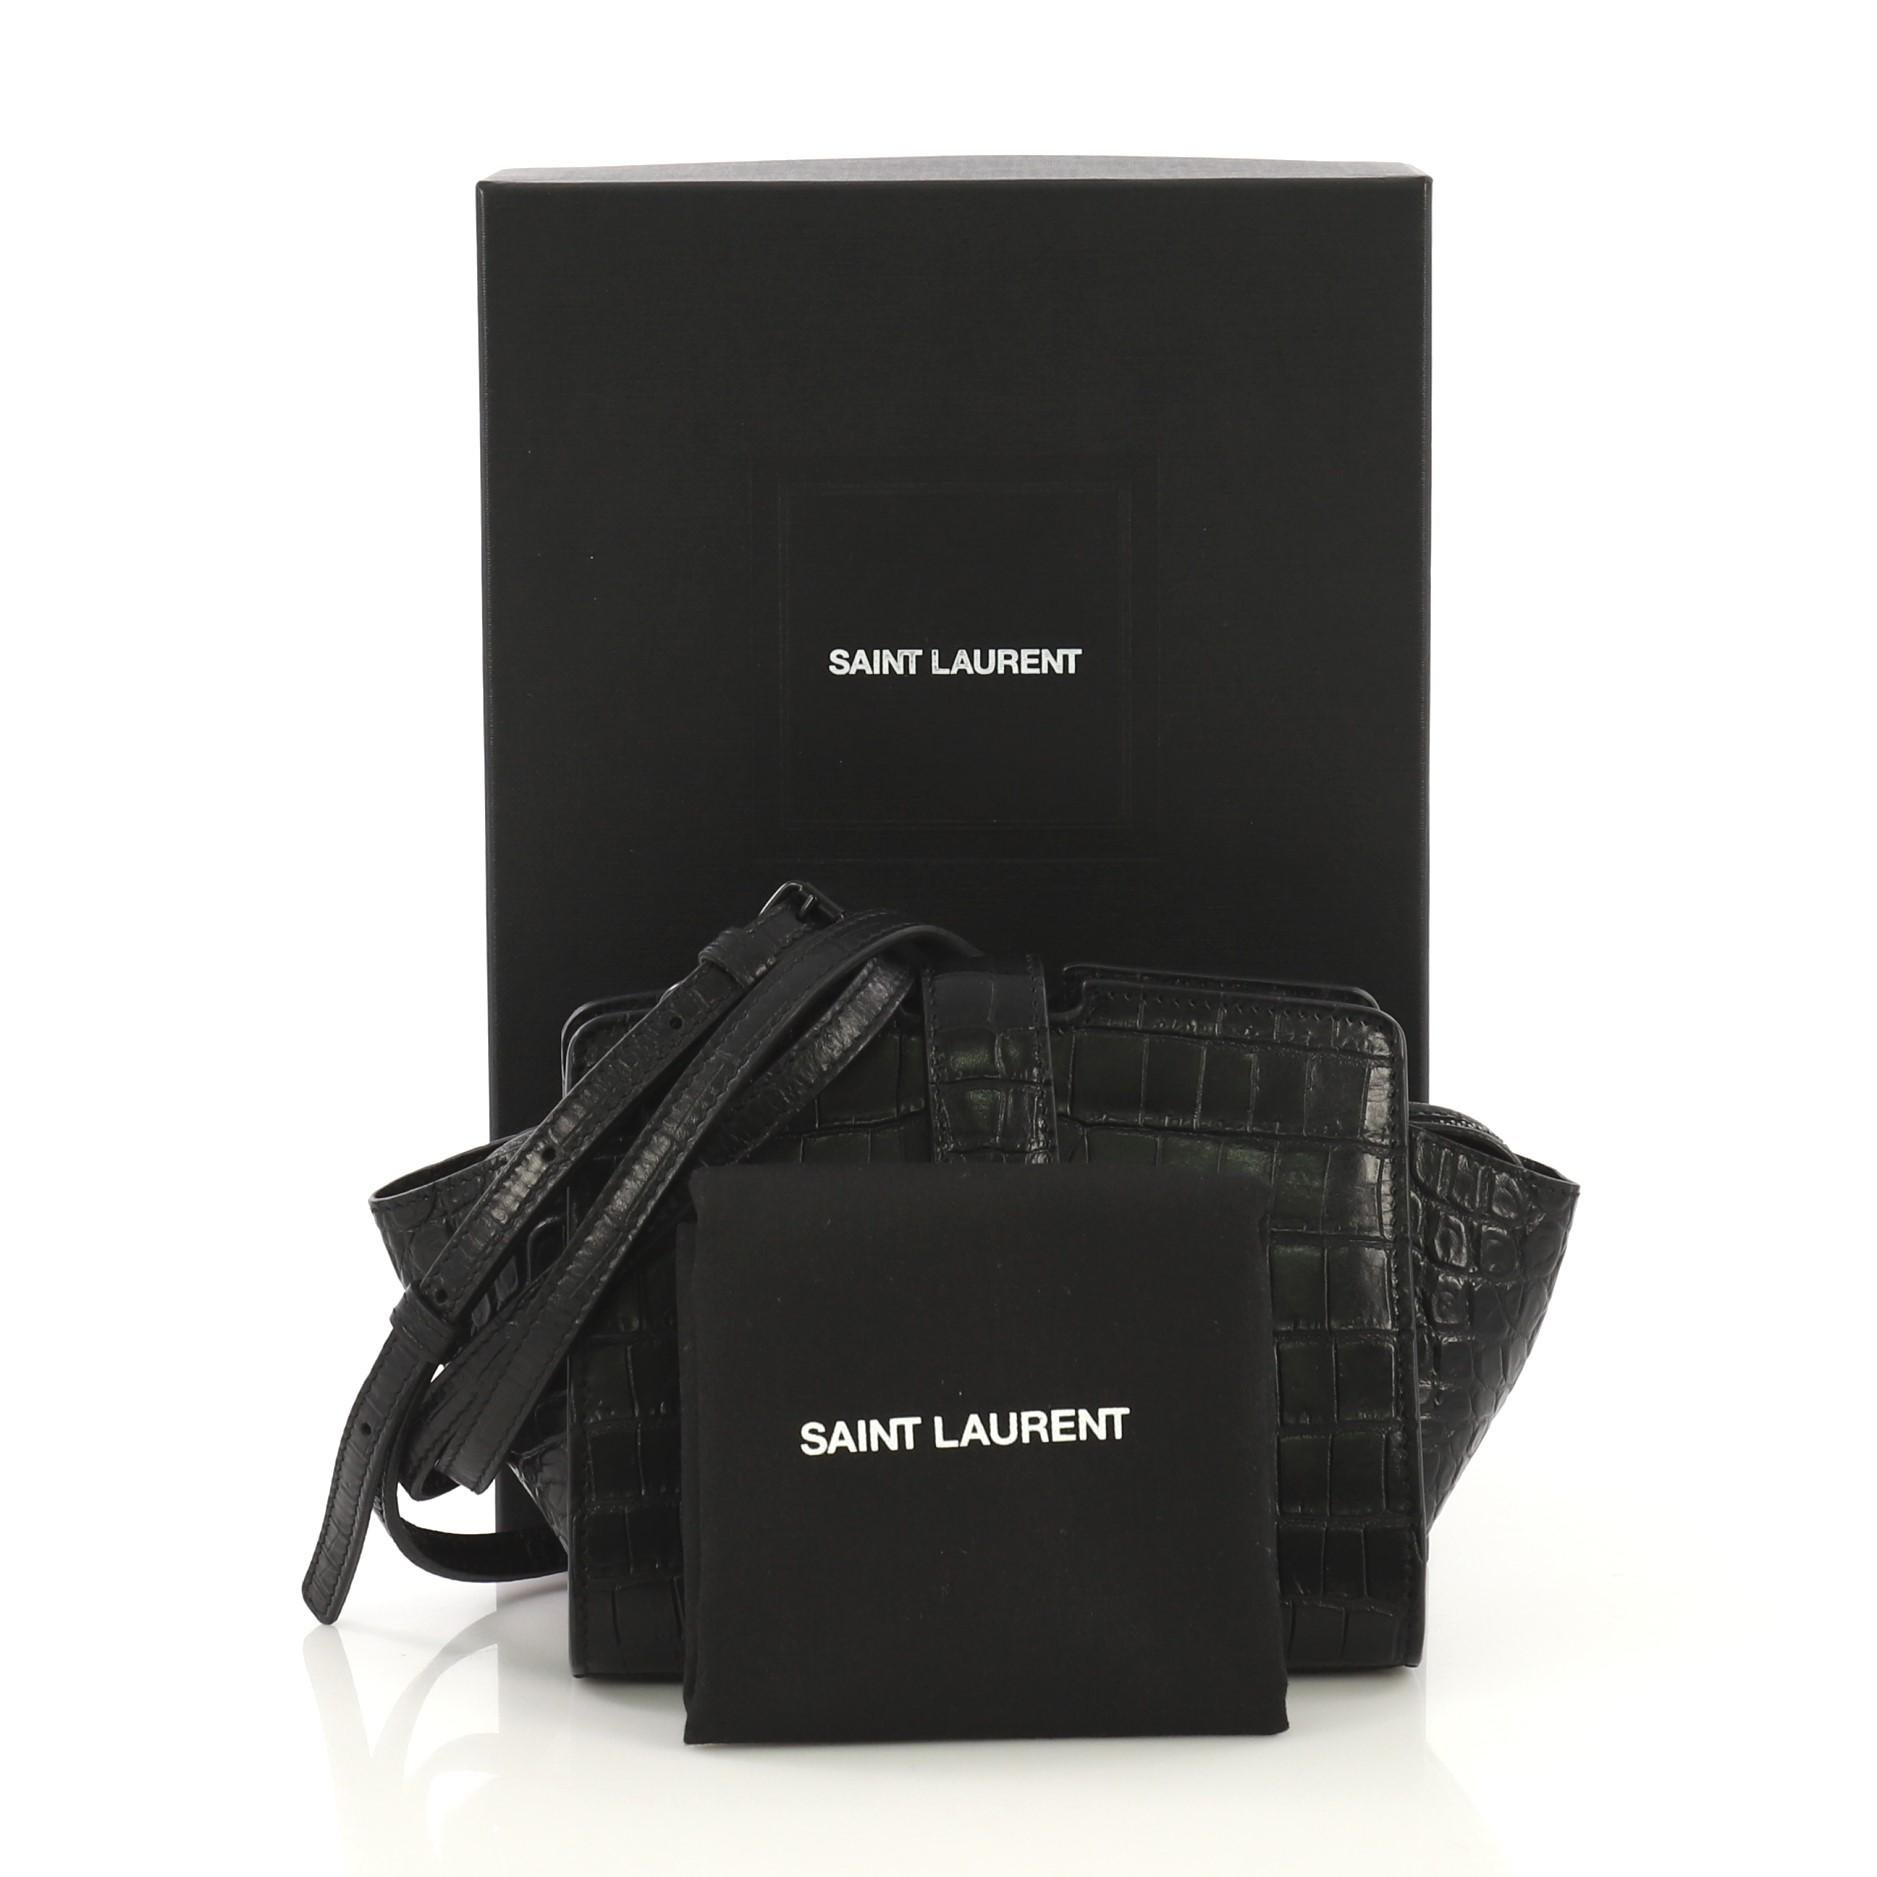 This Saint Laurent Monogram Cabas Crocodile Embossed Leather Toy, crafted from black crocodile embossed leather, features an adjustable shoulder strap, YSL metal logo at the front, and black-tone hardware. Its flap tab magnetic snap and zip closure